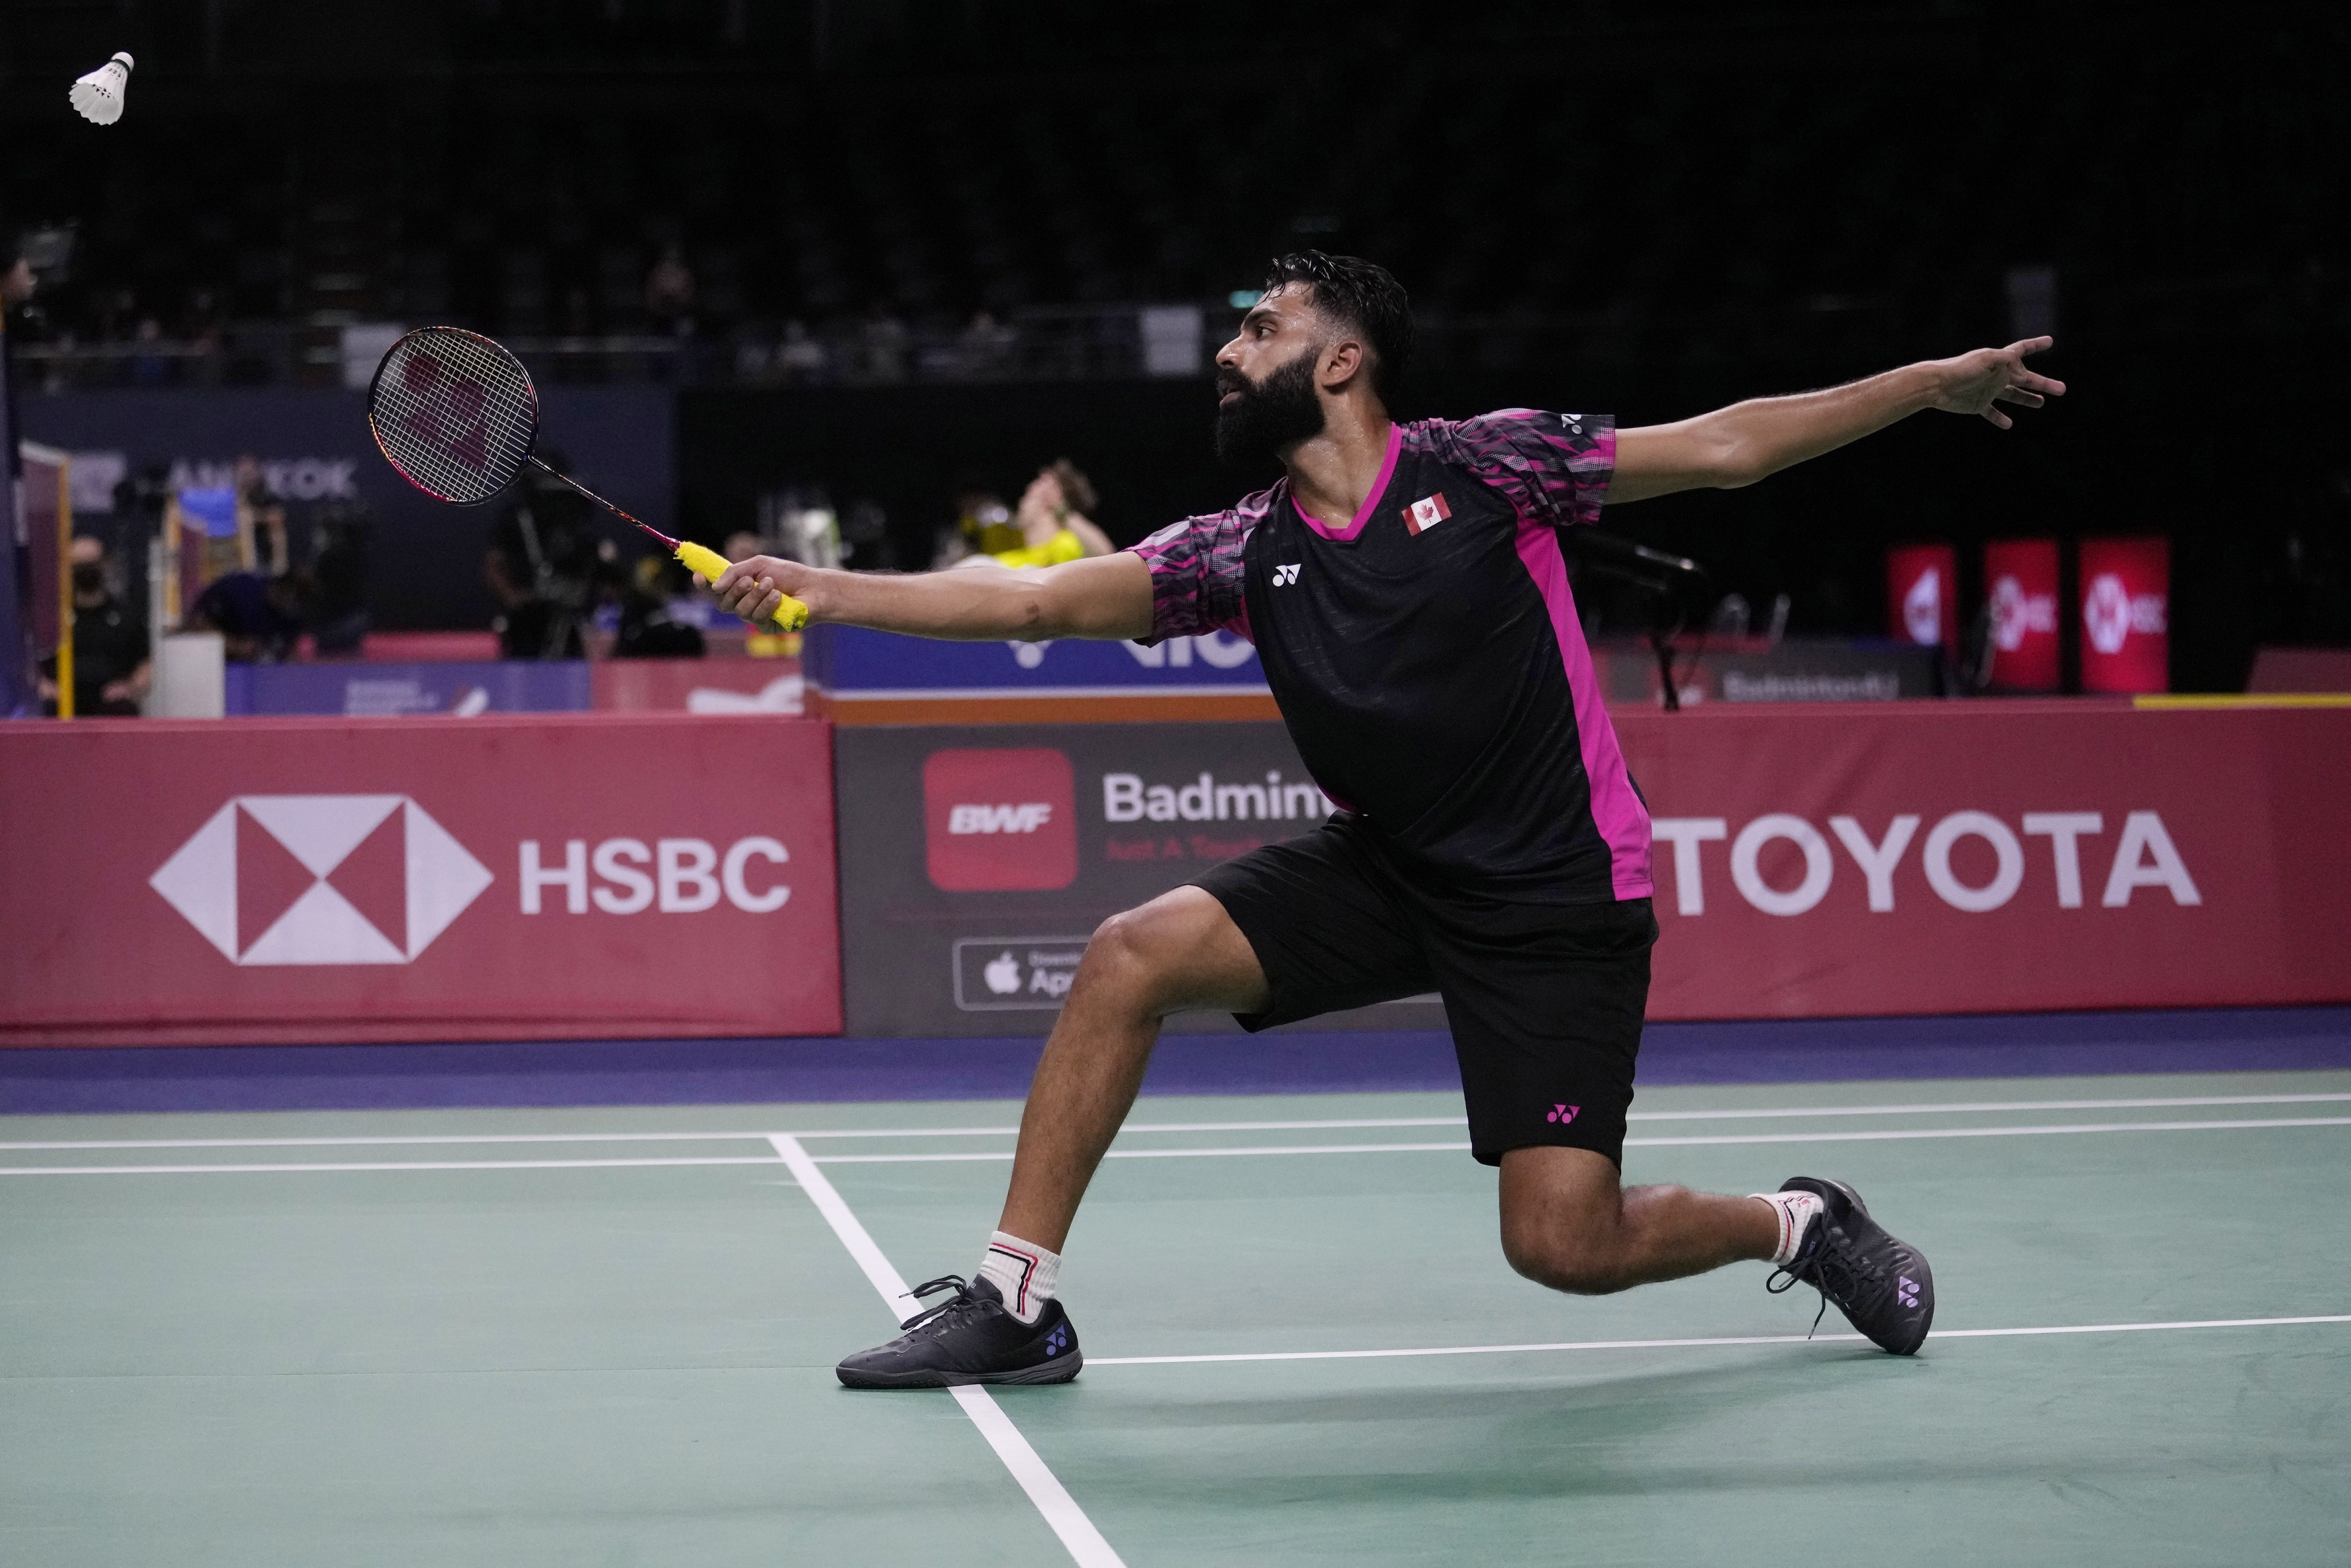 I was determined not to give up after ankle injury, says Prannoy after guiding India to Thomas Cup final